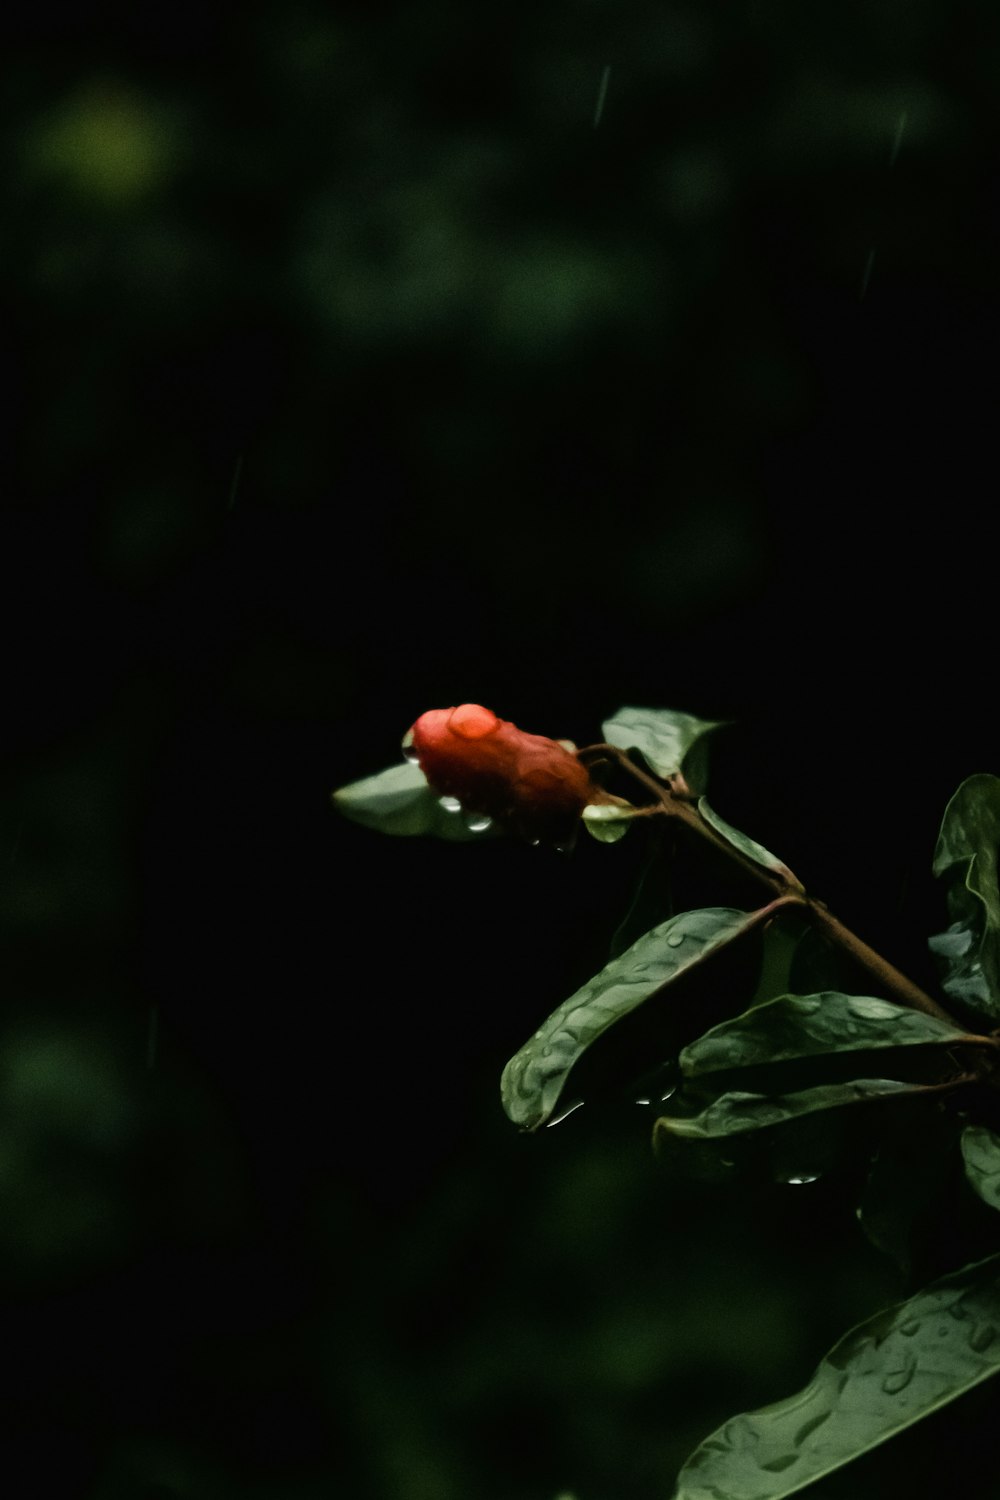 a single red rose with green leaves in the rain